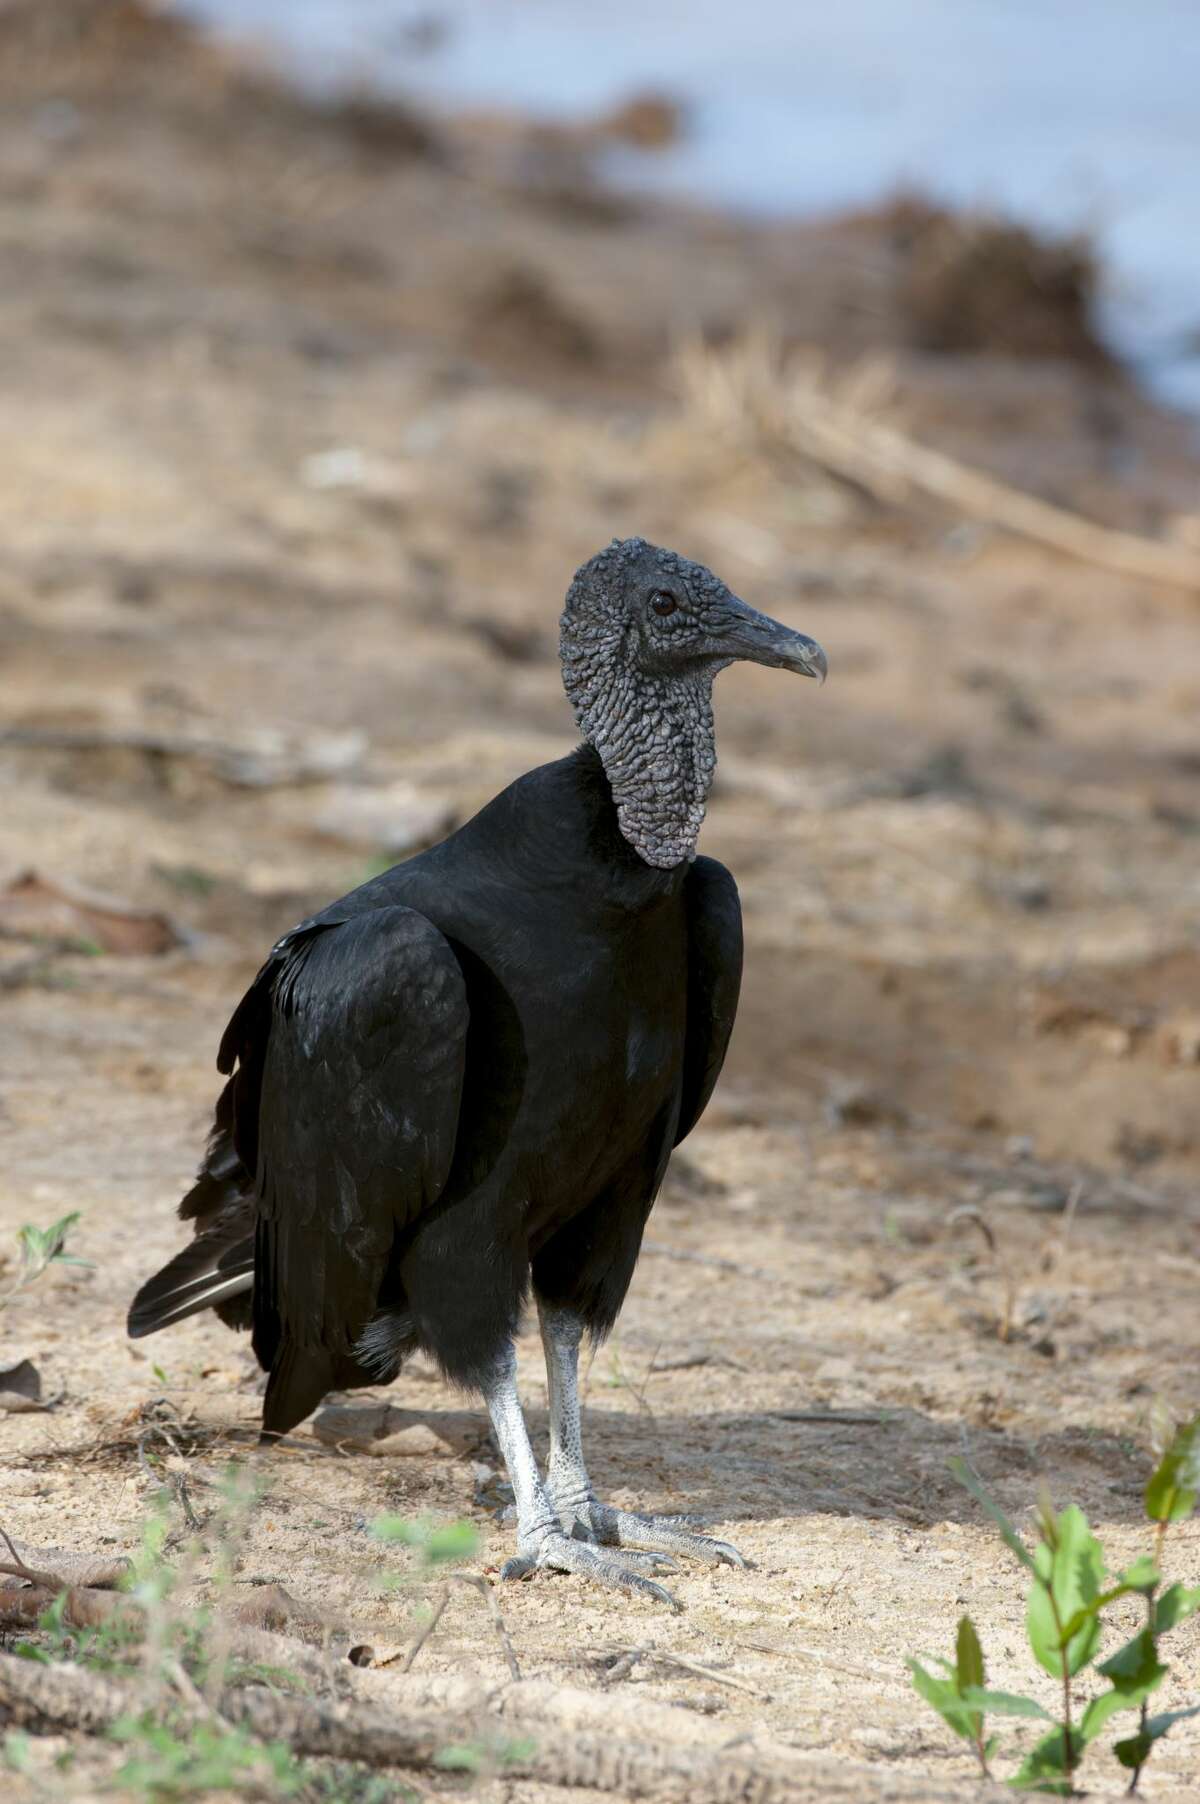 BRAZIL - 2009/07/07: A Black vulture (Coragyps atratus) on a beach along the Cuiaba River near Porto Jofre in the northern Pantanal, Mato Grosso province in Brazil. (Photo by Wolfgang Kaehler/LightRocket via Getty Images)